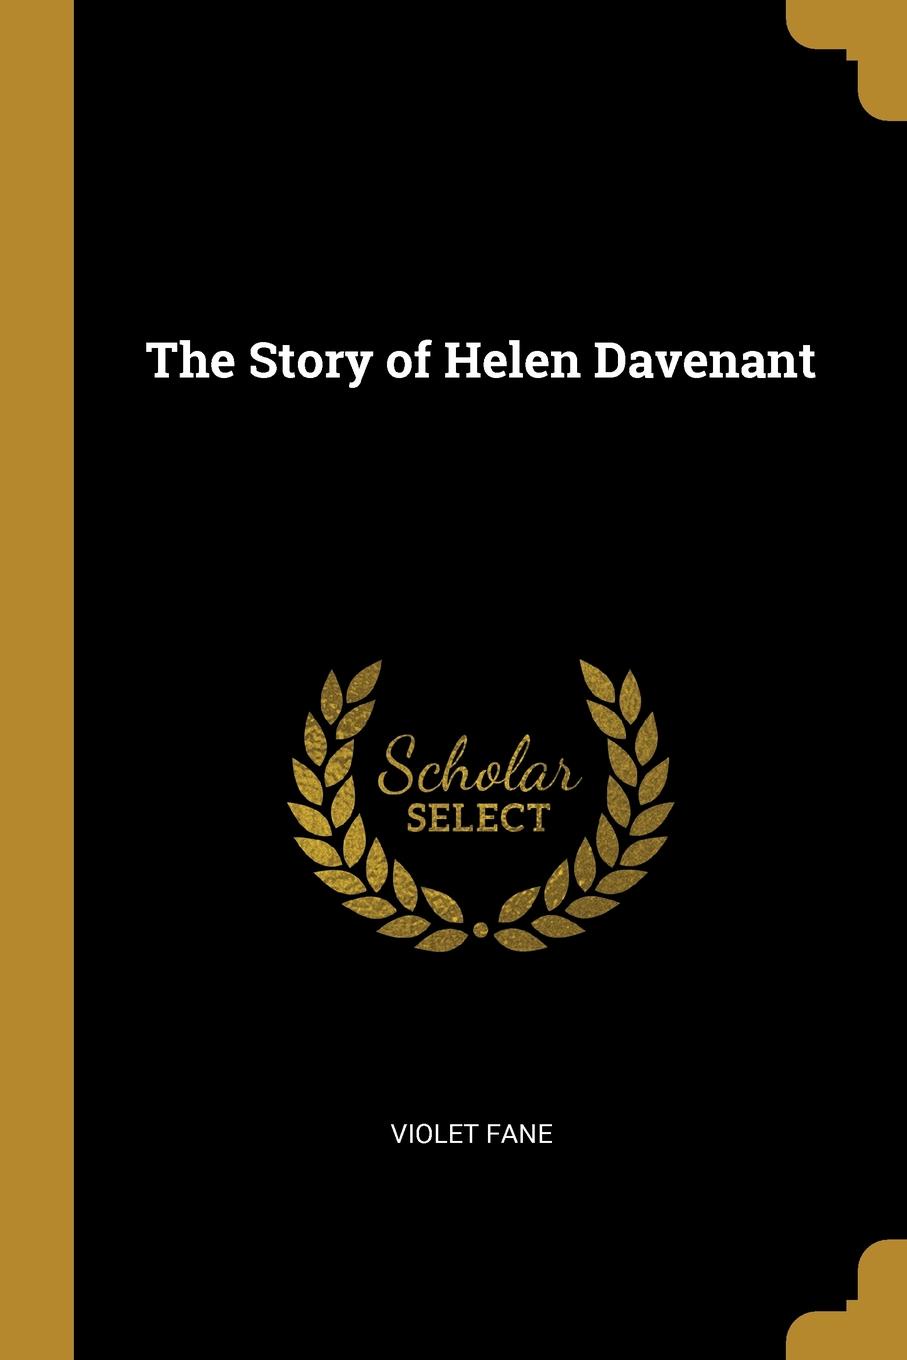 The Story of Helen Davenant